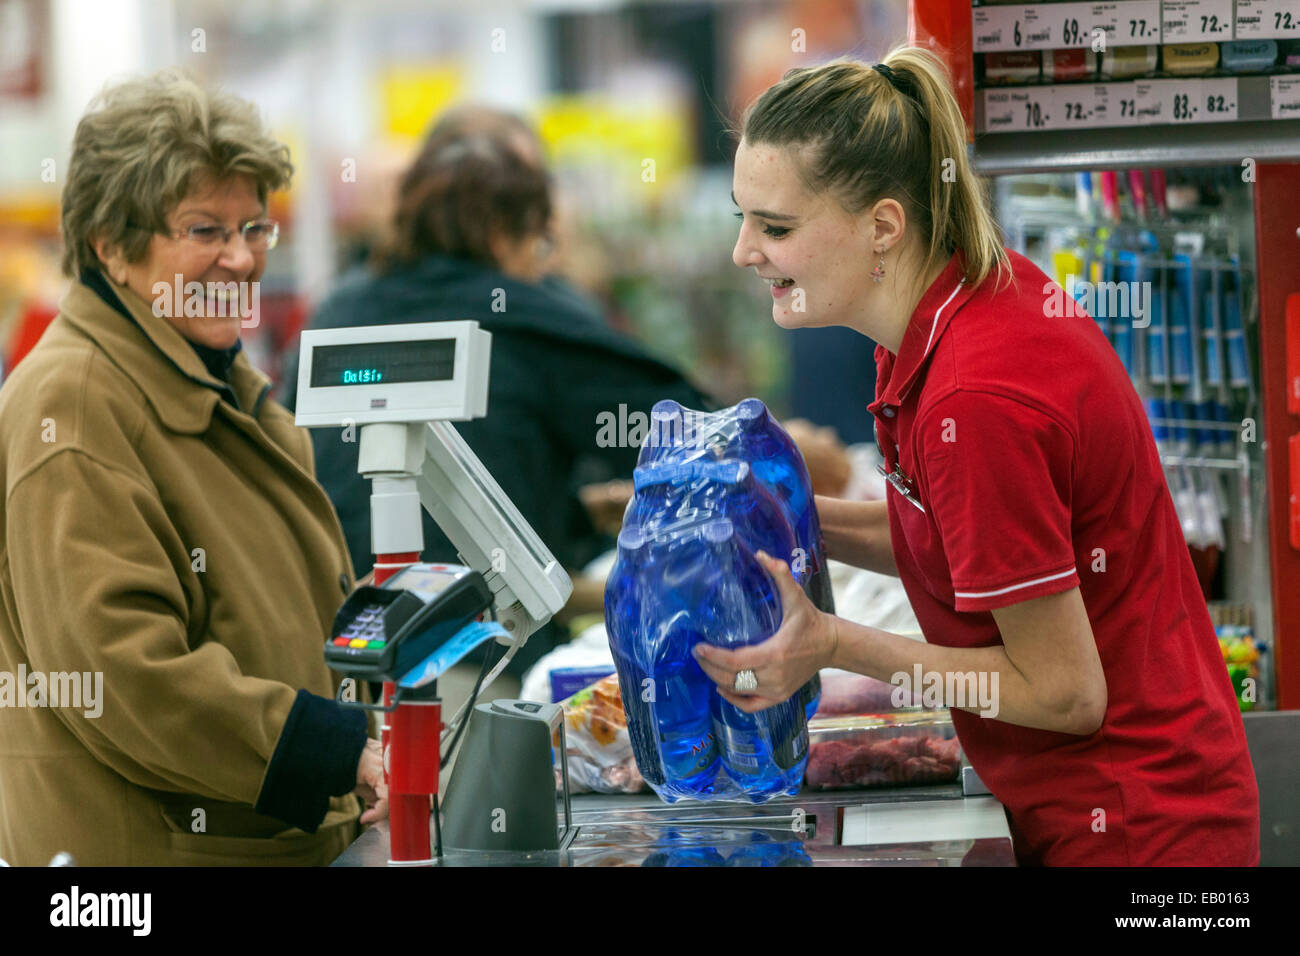 People Senior woman shopping in supermarket checkout Cashier woman reads barcodes of water bottles Stock Photo